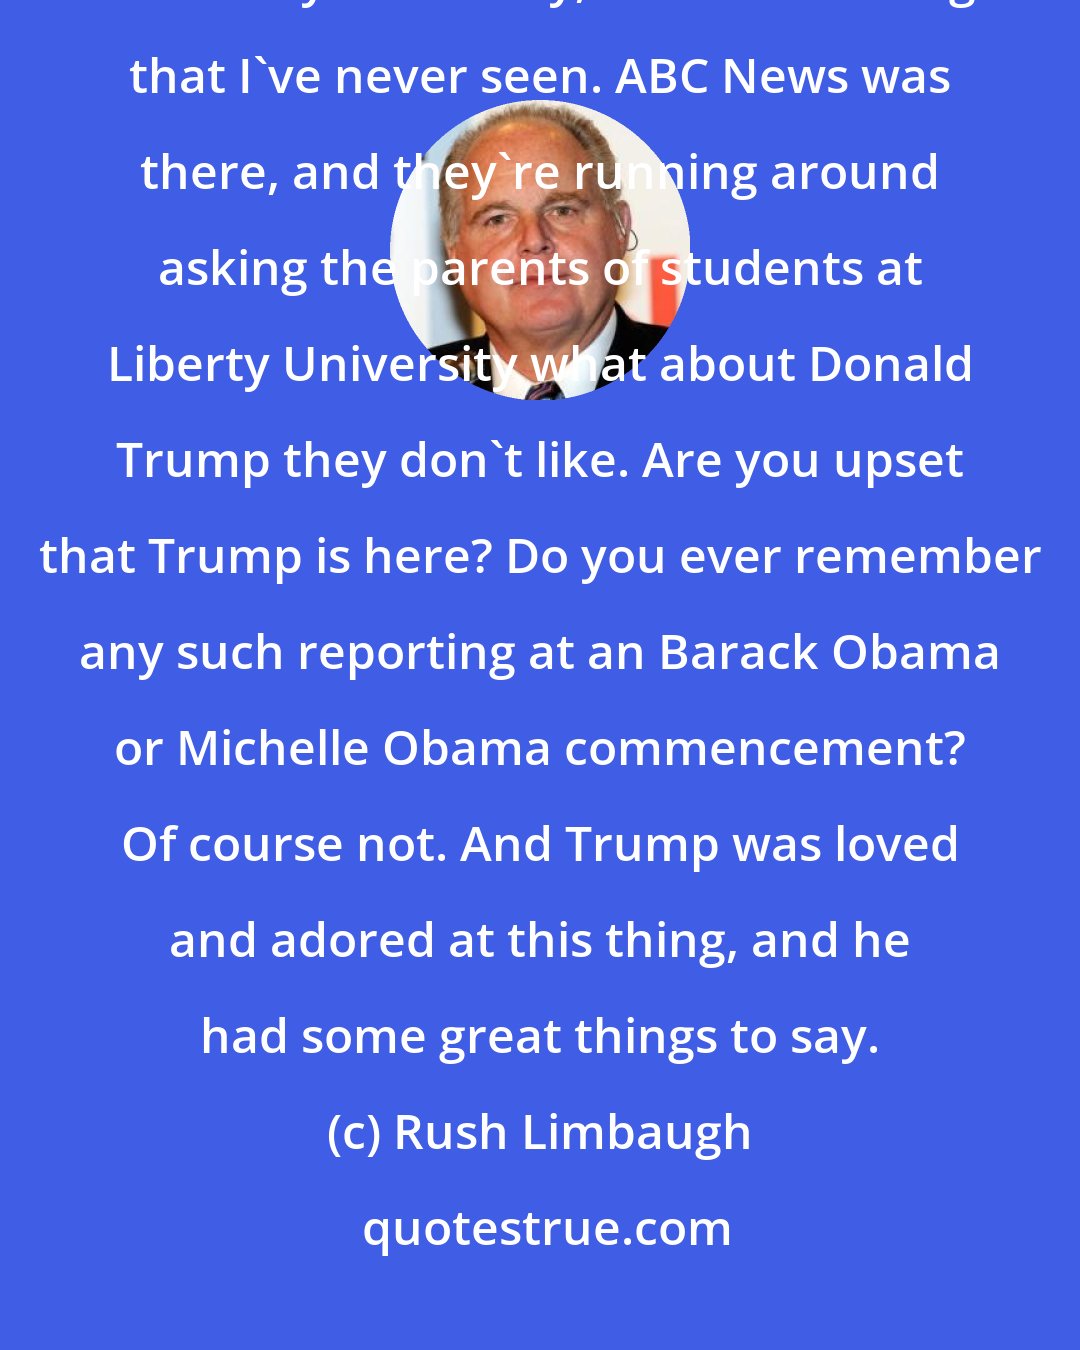 Rush Limbaugh: It's just like when Trump made his speech, his commencement speech at Liberty University, I saw something that I've never seen. ABC News was there, and they're running around asking the parents of students at Liberty University what about Donald Trump they don't like. Are you upset that Trump is here? Do you ever remember any such reporting at an Barack Obama or Michelle Obama commencement? Of course not. And Trump was loved and adored at this thing, and he had some great things to say.